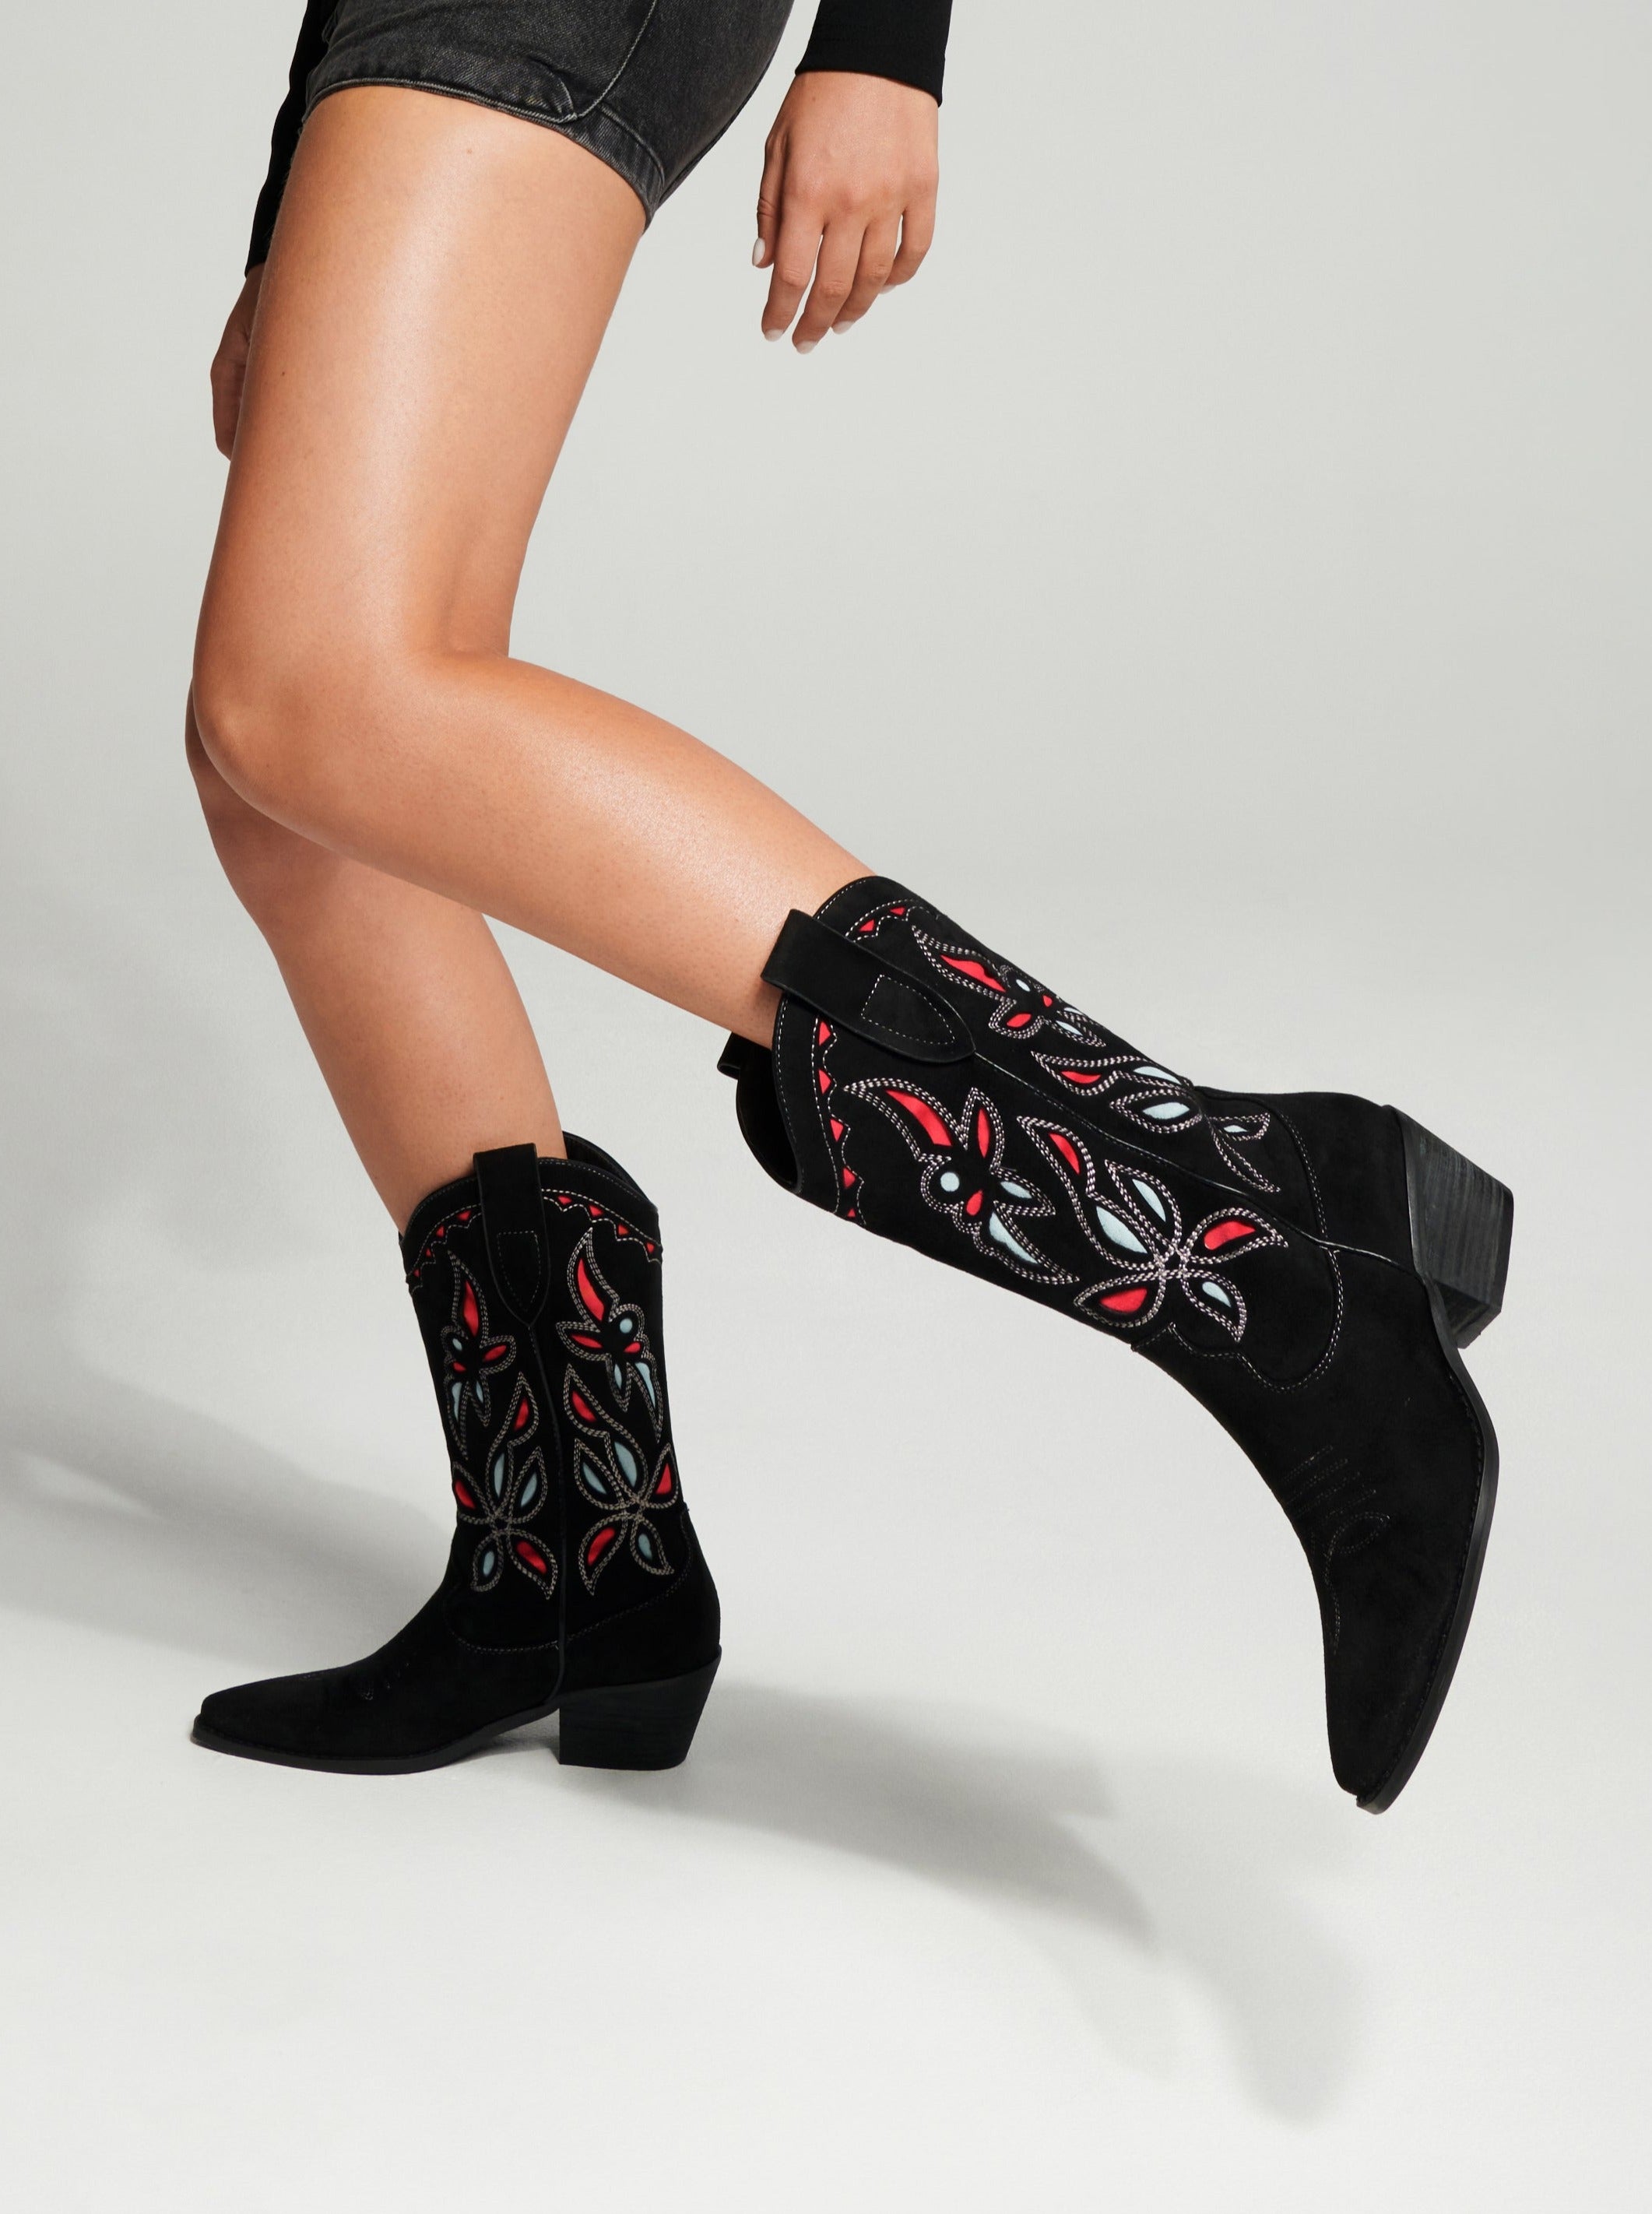 Therapy Shoes Miley Black | Women's Boots | Western | Cowboy | Tall